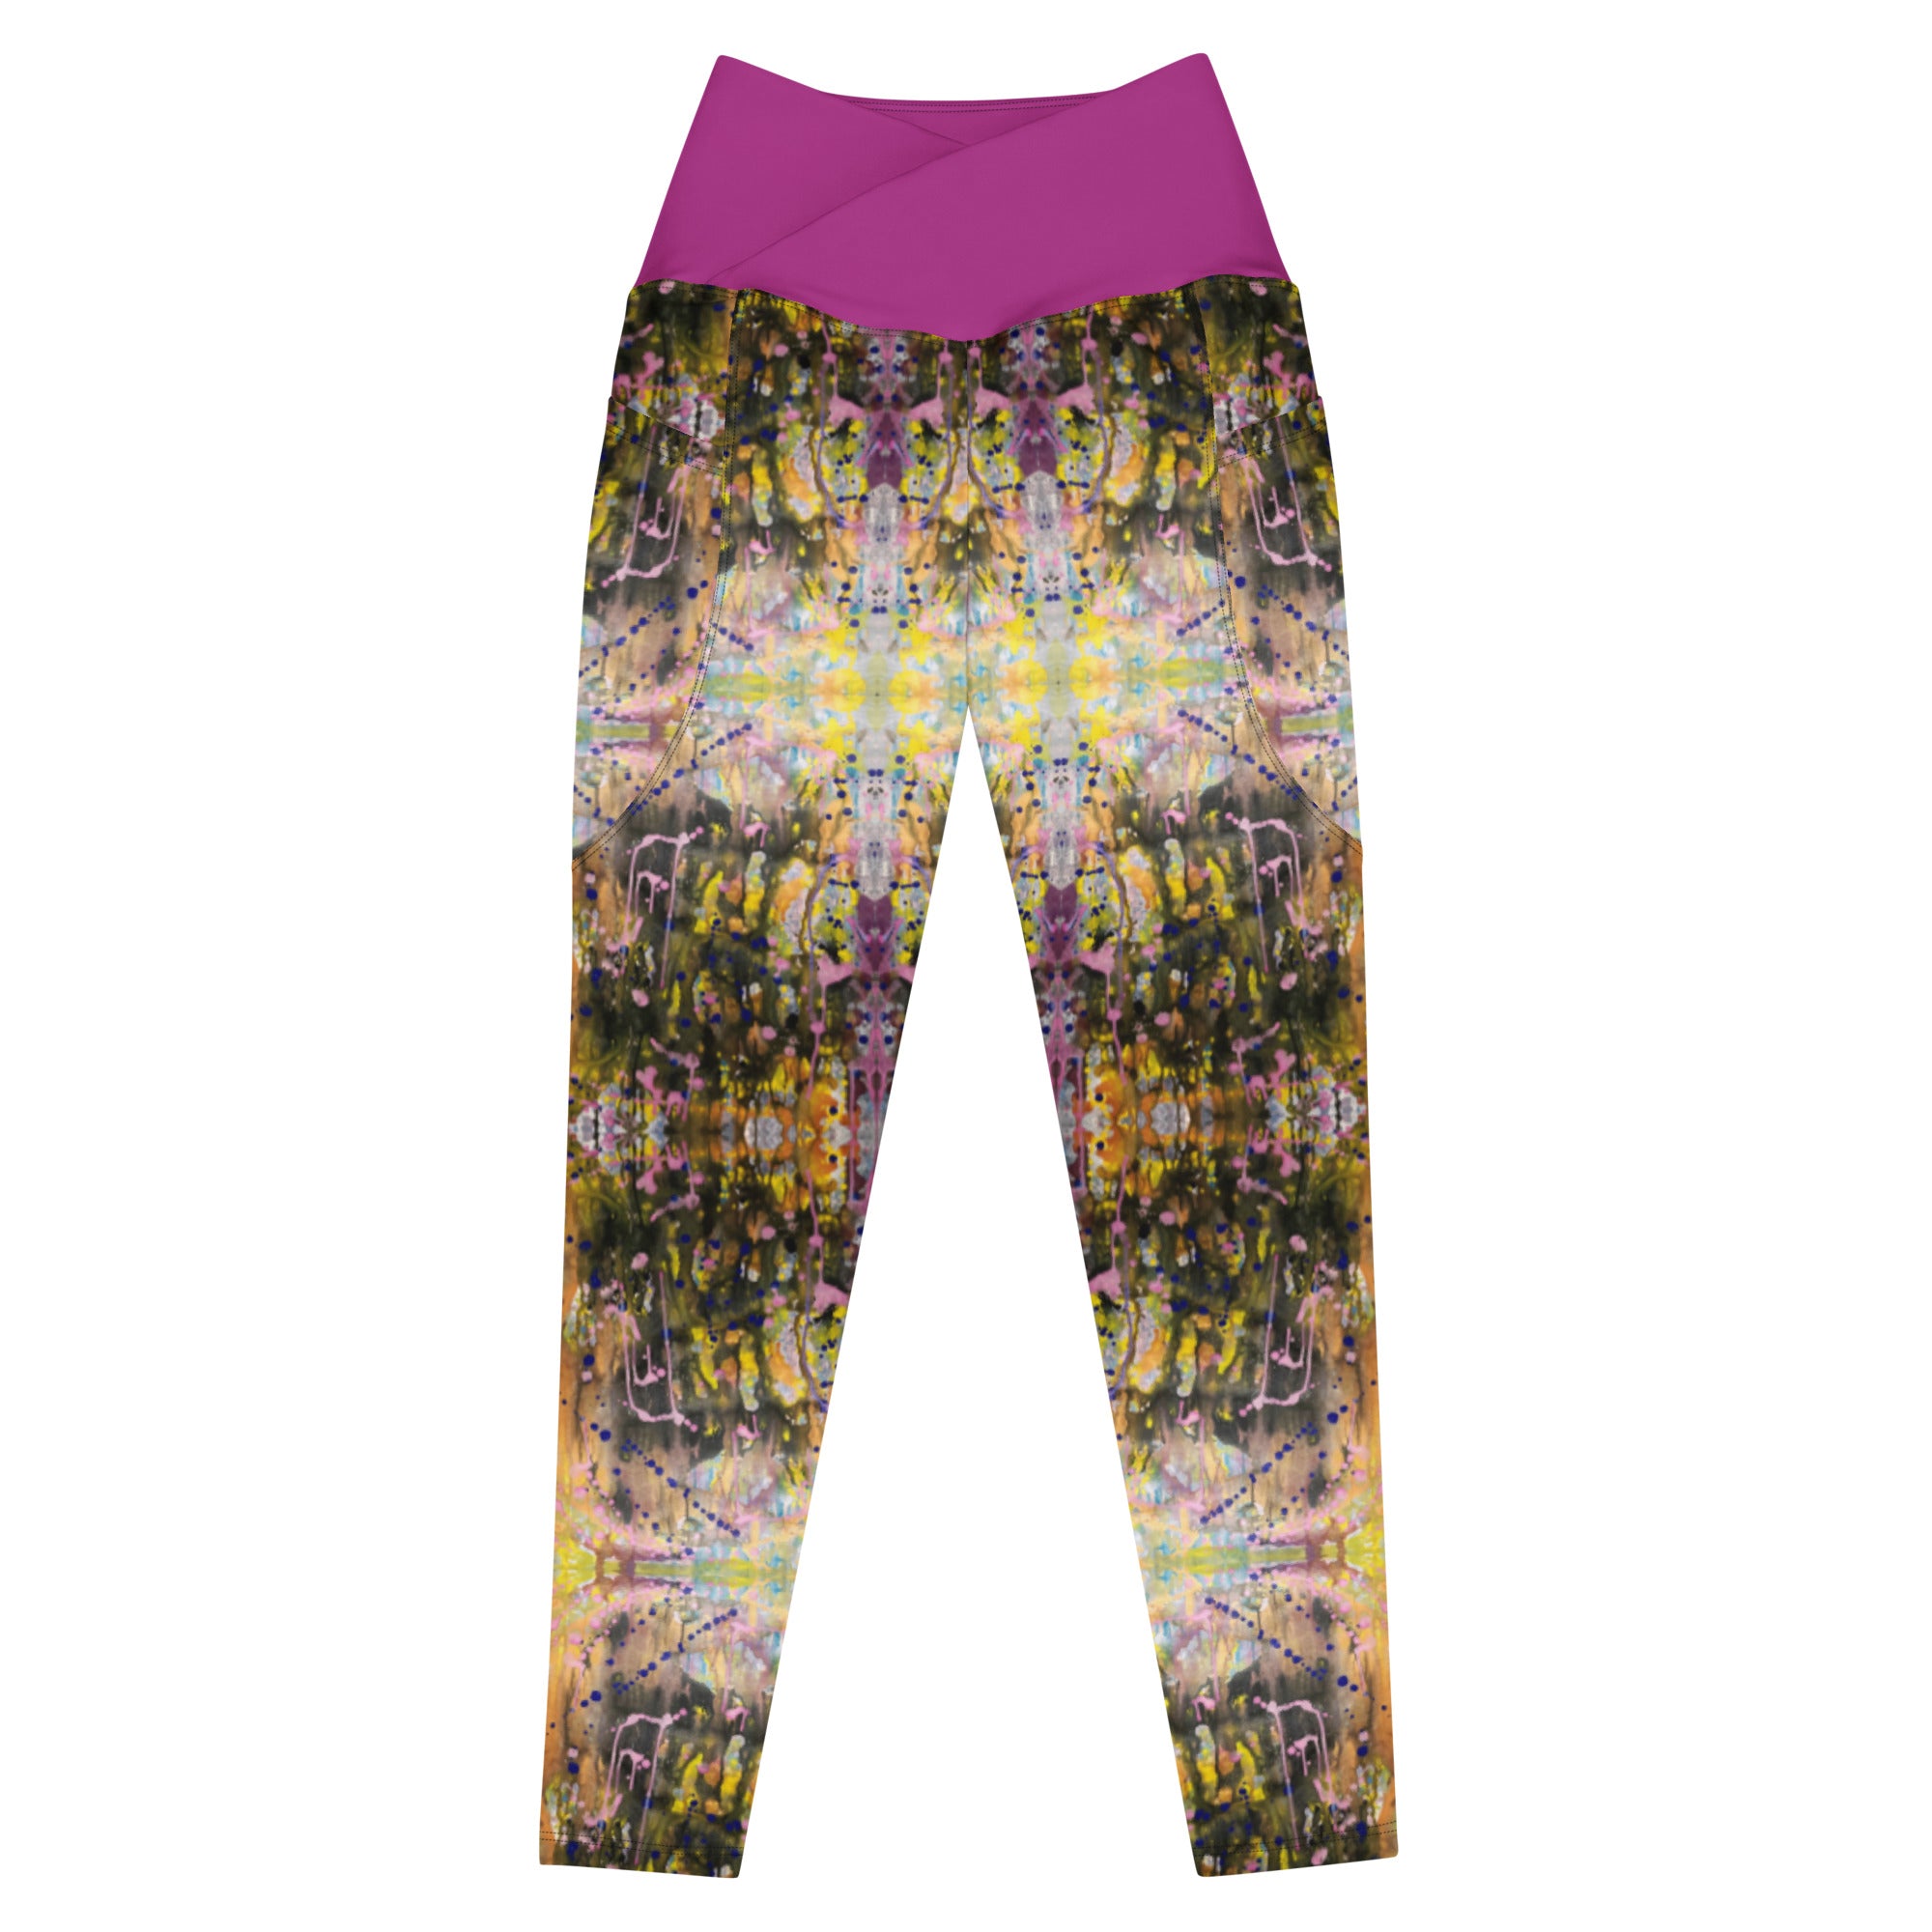 Crossover leggings, too much drip – The Pastel Abstract